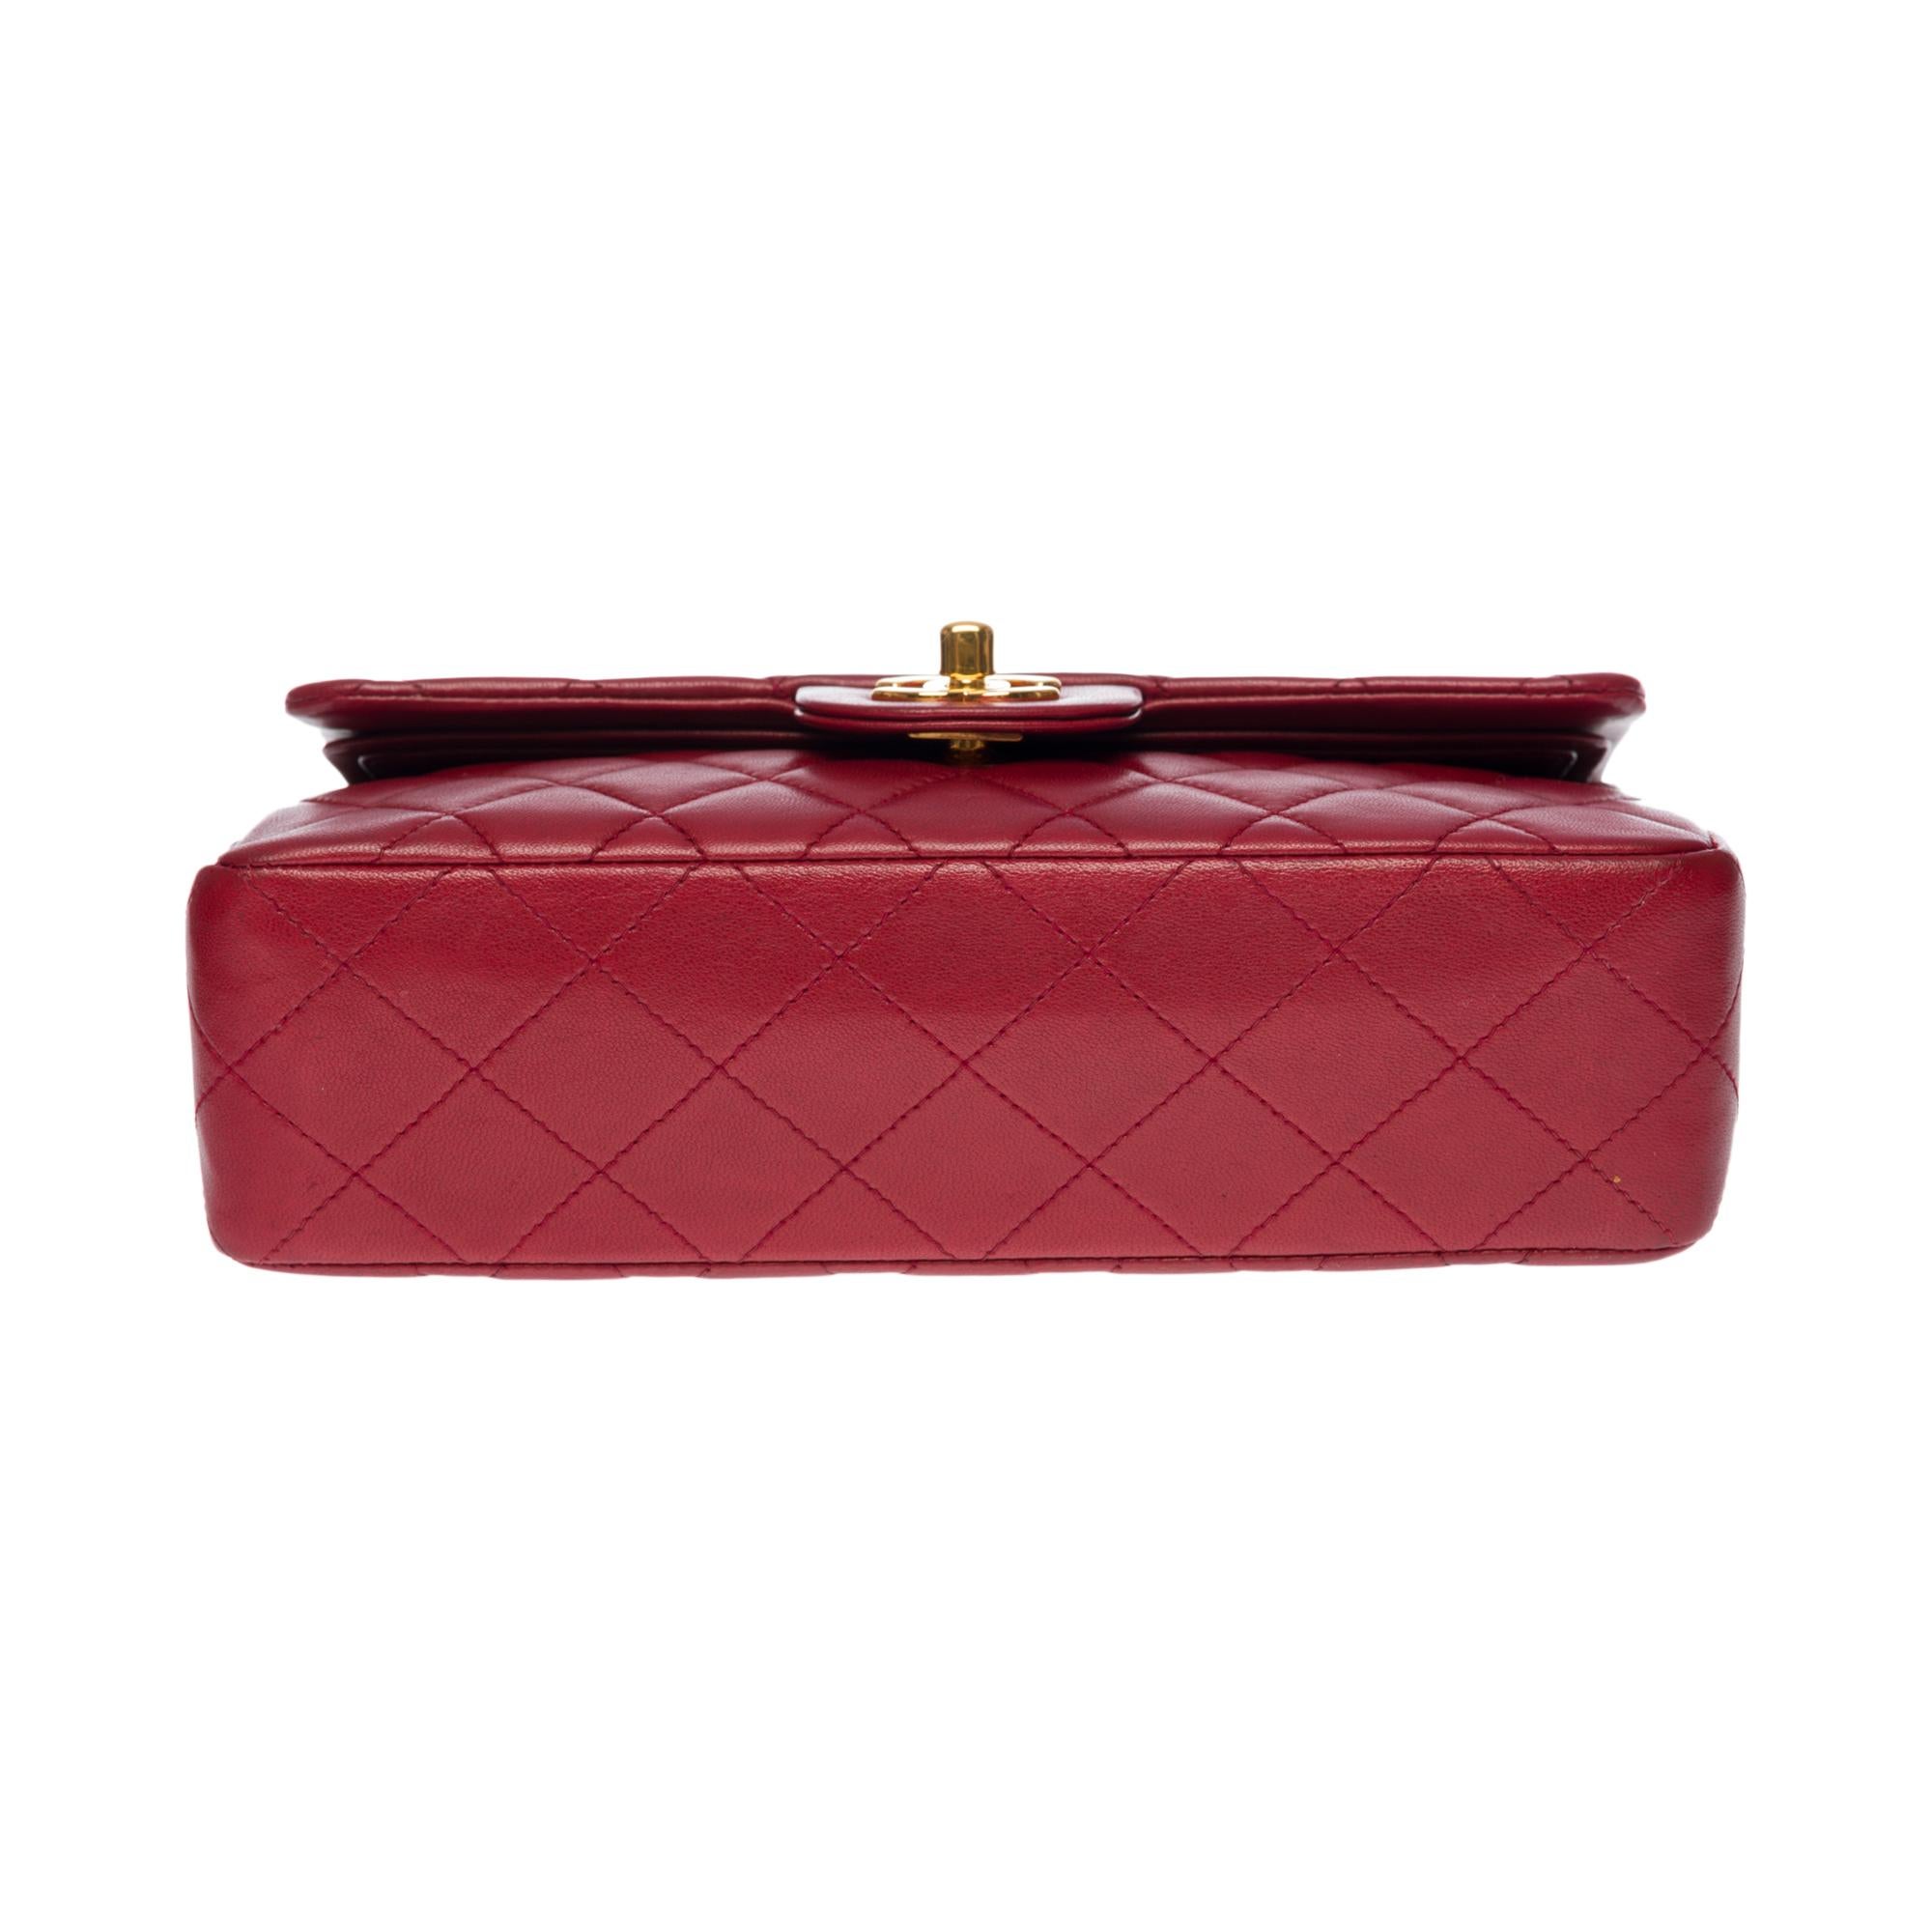 Chanel Timeless 23cm double flap Shoulder bag in red quilted lambskin, GHW 4